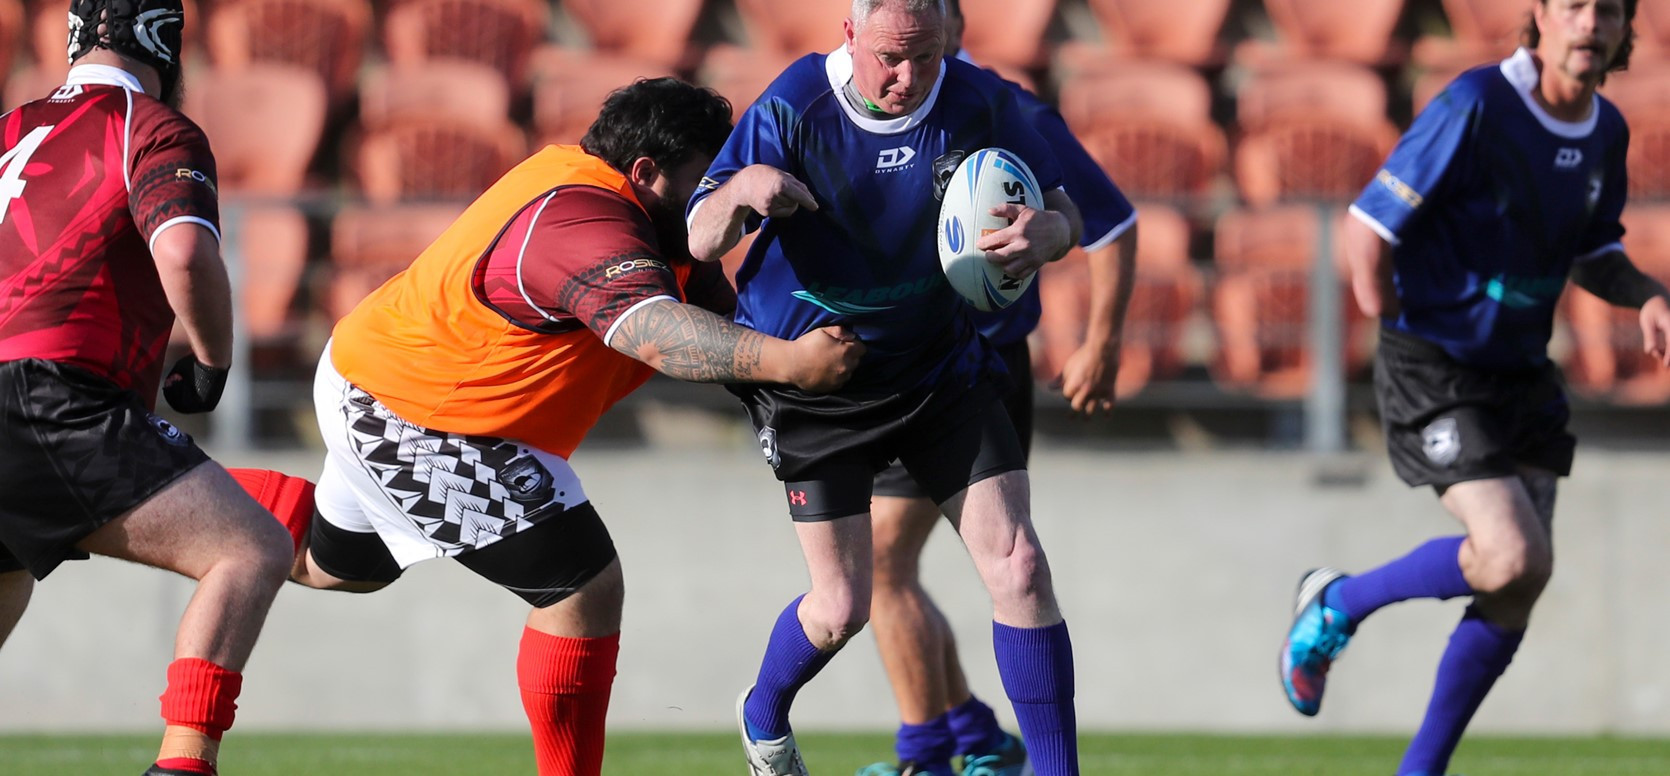 An inaugural Physical Disability Rugby League World Cup will be held next year ©IRL